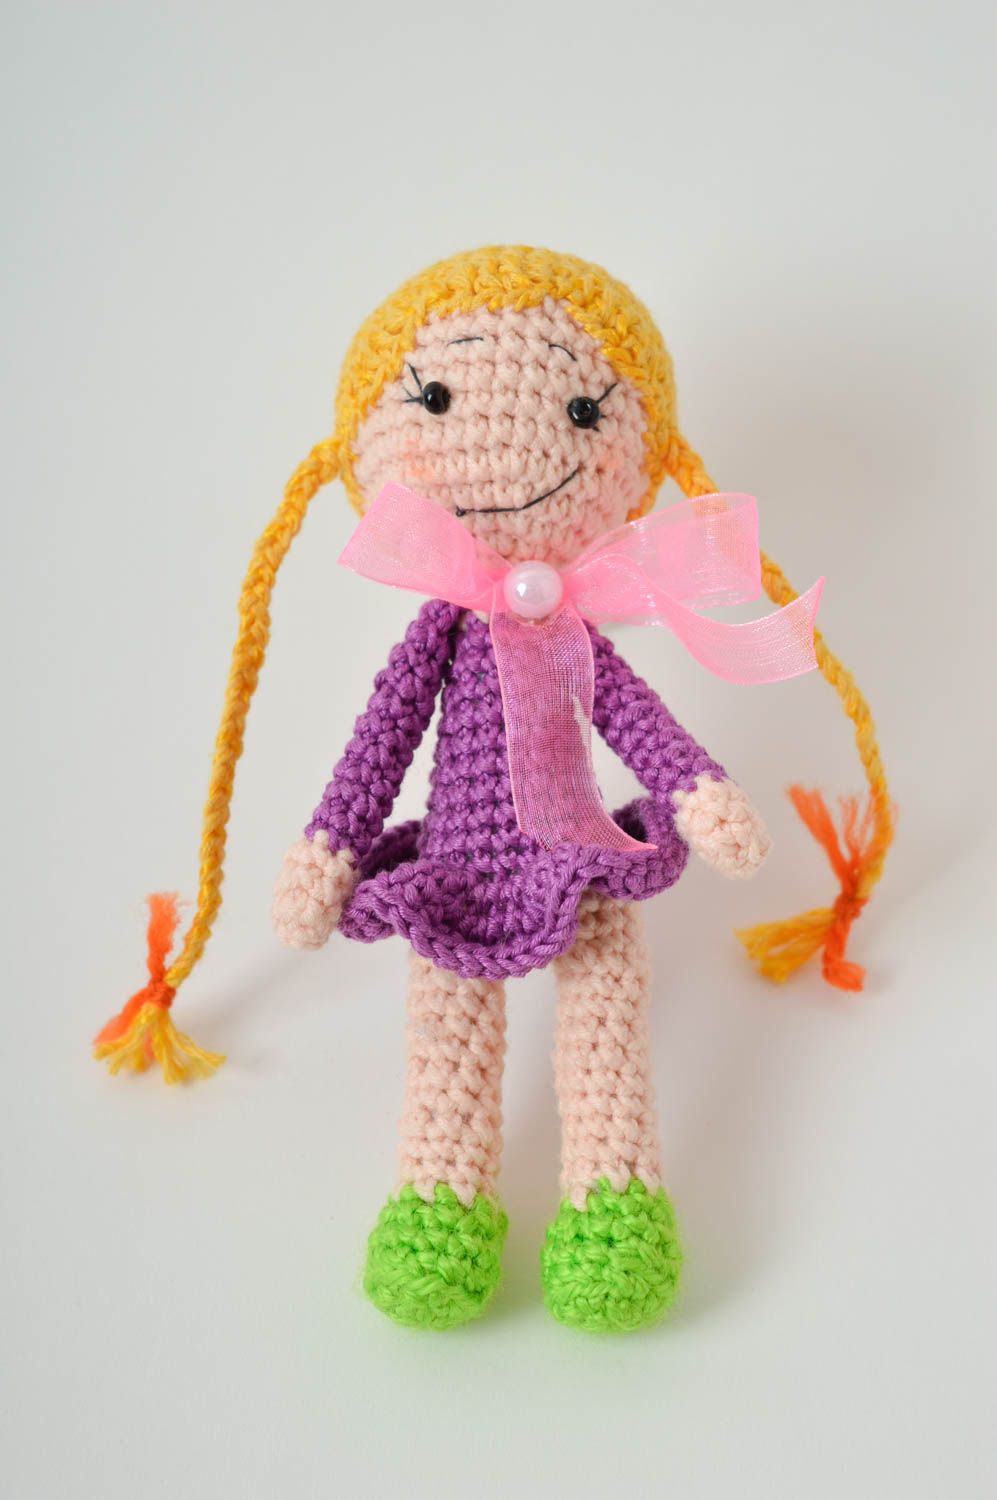 Cute doll handmade crocheted toy for children stuffed toys hand-crocheted toys photo 2